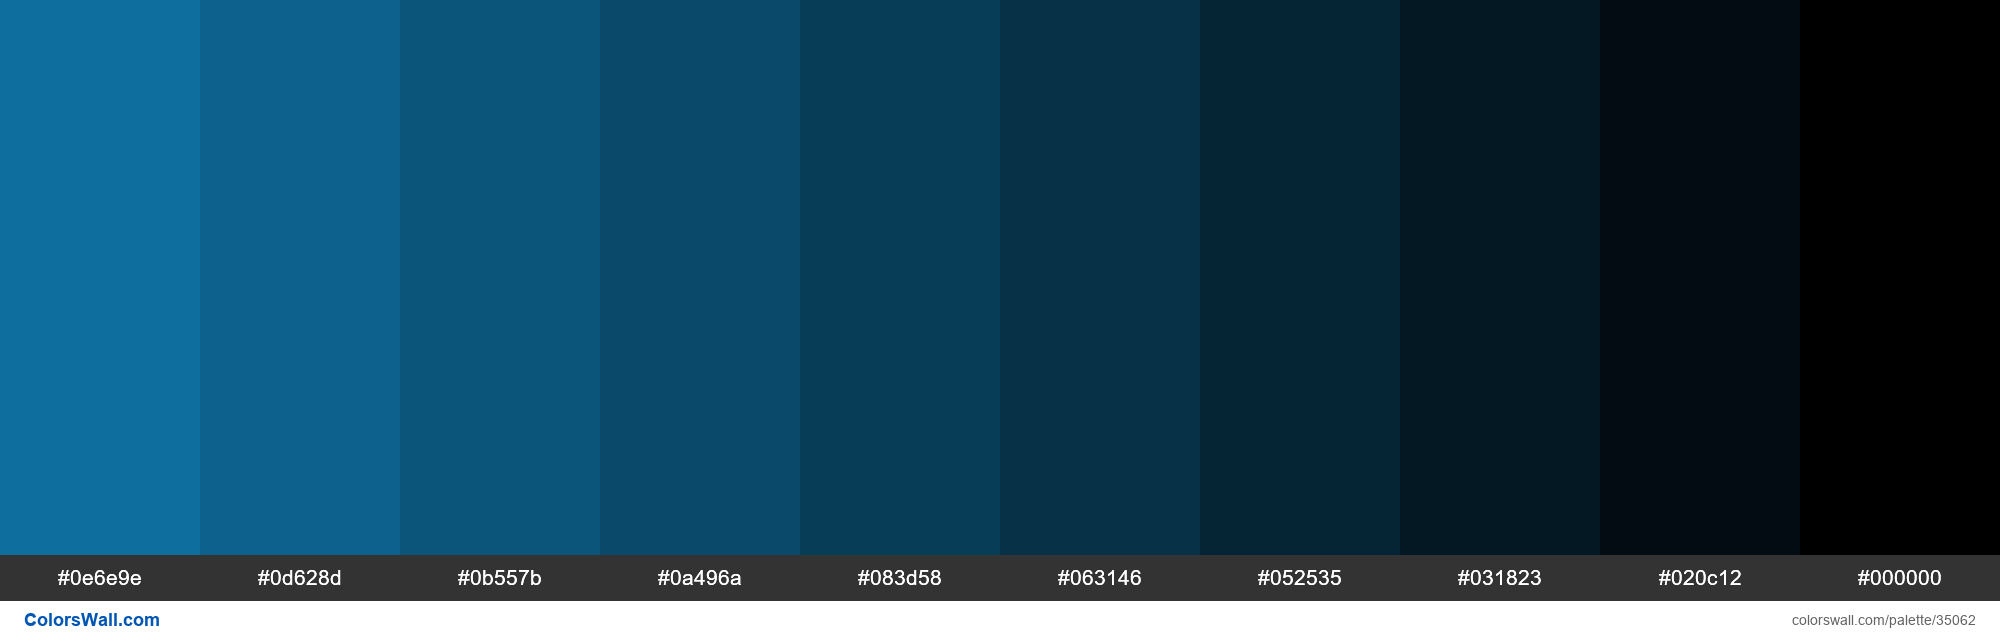 Shades XKCD Color nice blue #107ab0 hex colors palette - ColorsWall